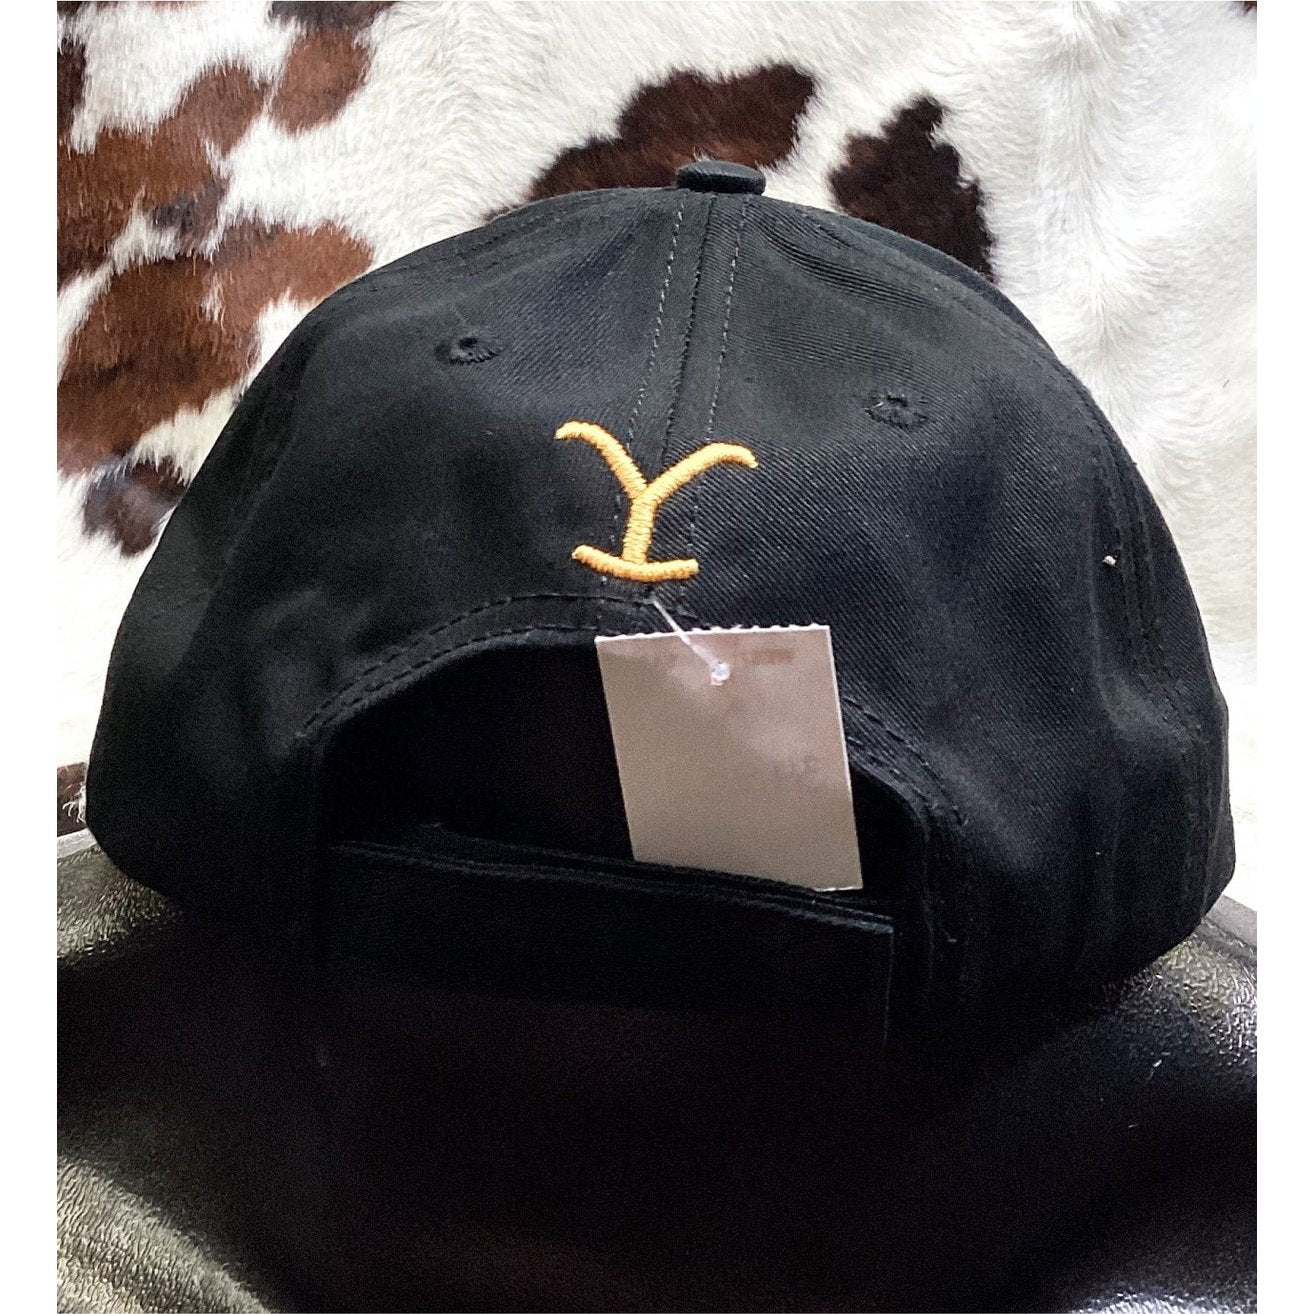 Changes Licensed Yellowstone Unisex Cap Curved Mid Profile 66-656-14 - Changes Licensed Apparel